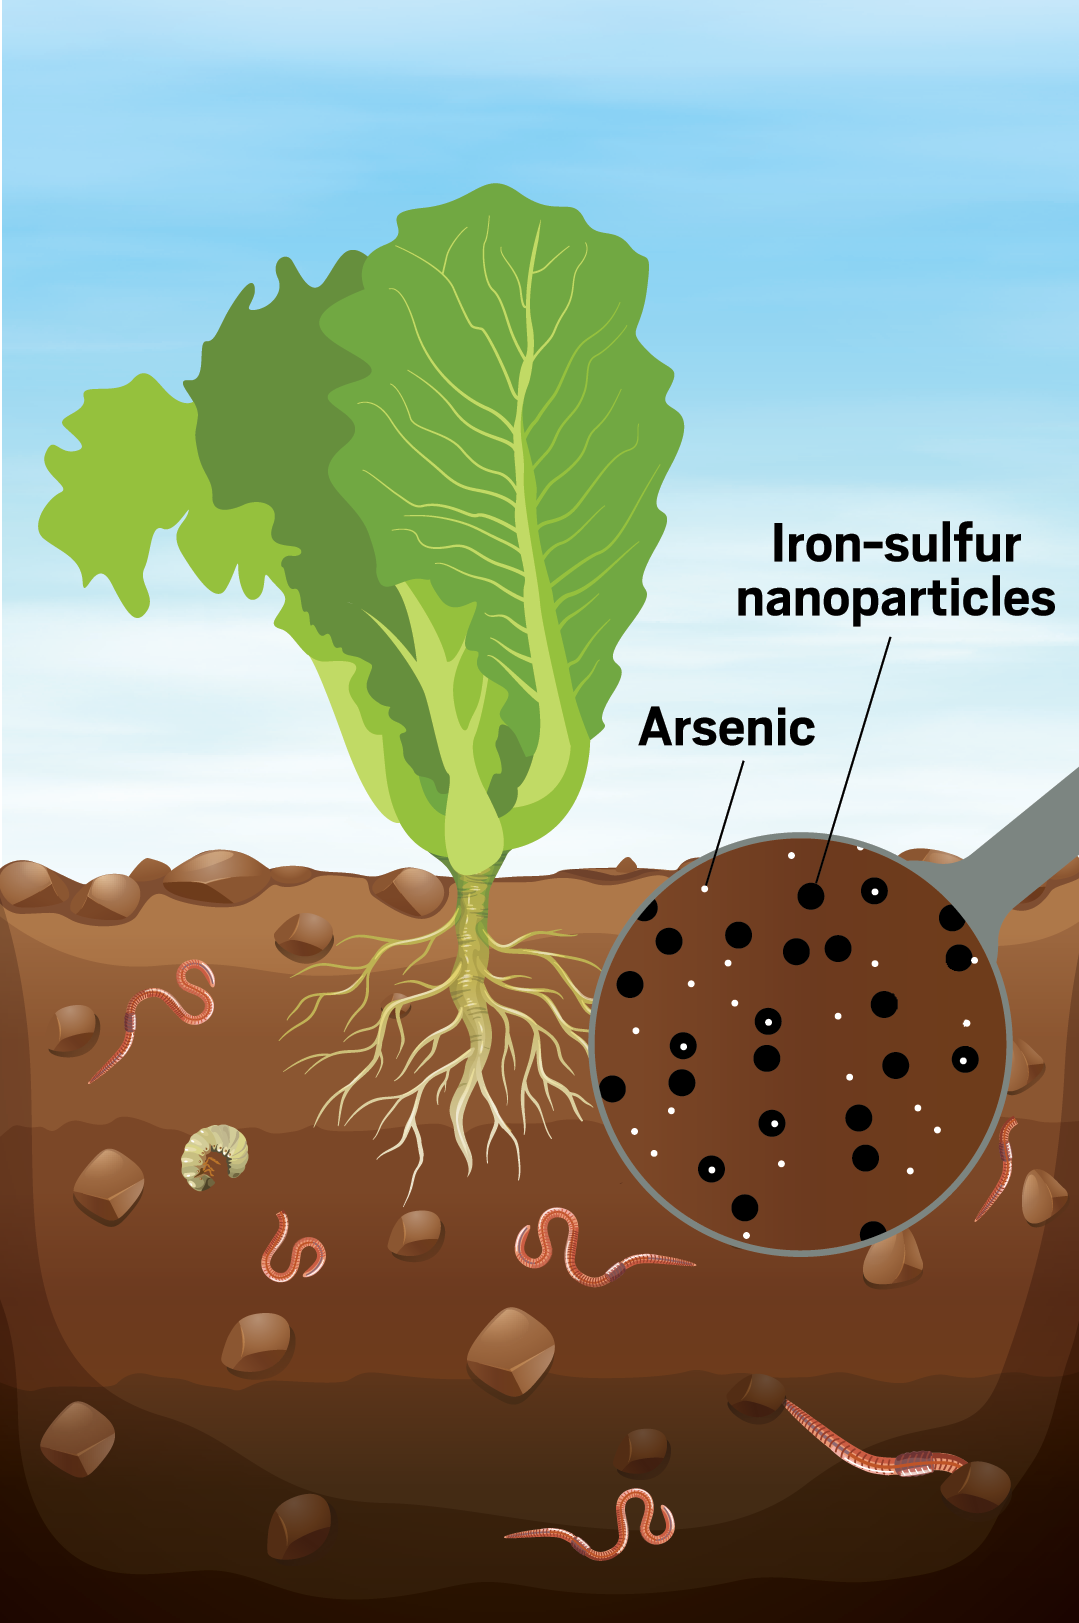 Research at a glance: Adeyemi Adeleye develops iron-sulfur nanoparticles for remediating soils contaminated with toxic arsenic. He’s working to mitigate the toxicity of the nanoparticles themselves and studying how well they can immobilize arsenic and protect crops like lettuce and animals like earthworms.